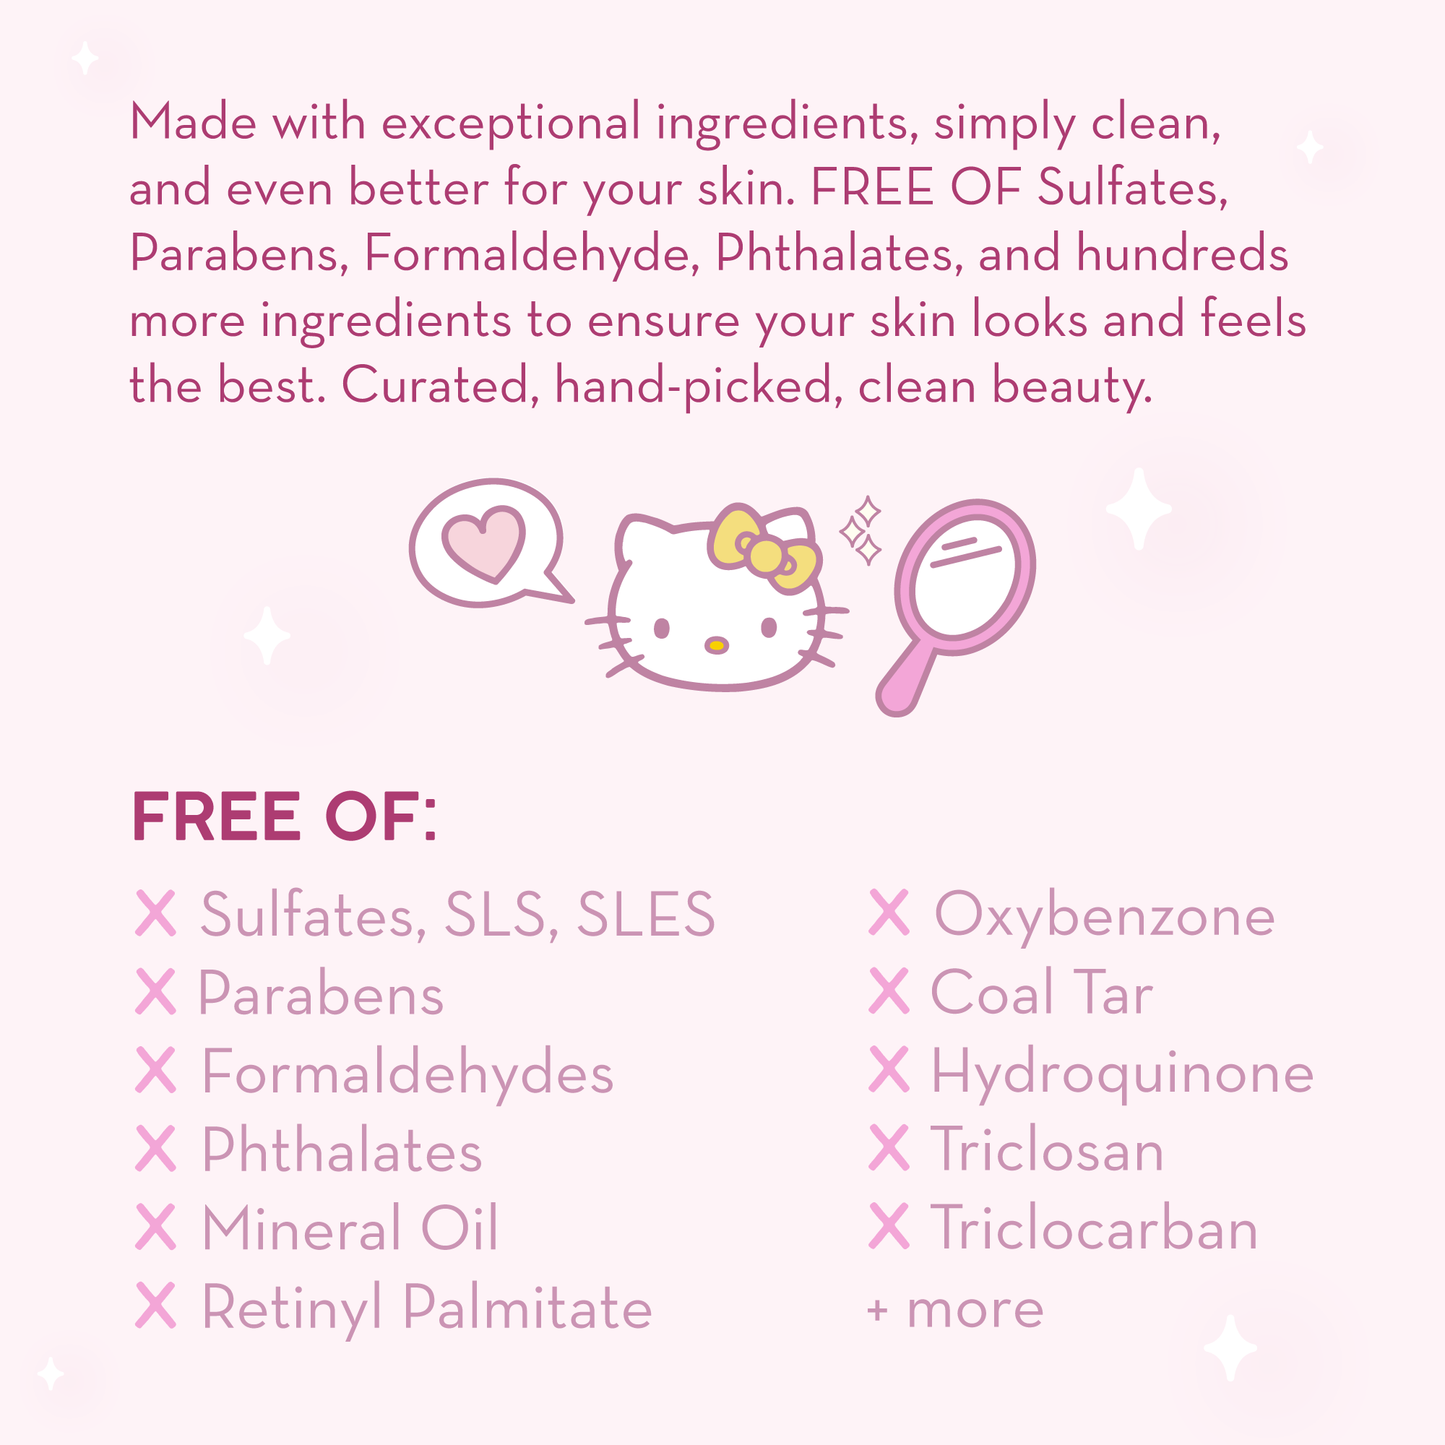 The Crème Shop x Hello Kitty 3-In-1 Complete Cleansing Towelettes Skin Care The Crème Shop x Sanrio 